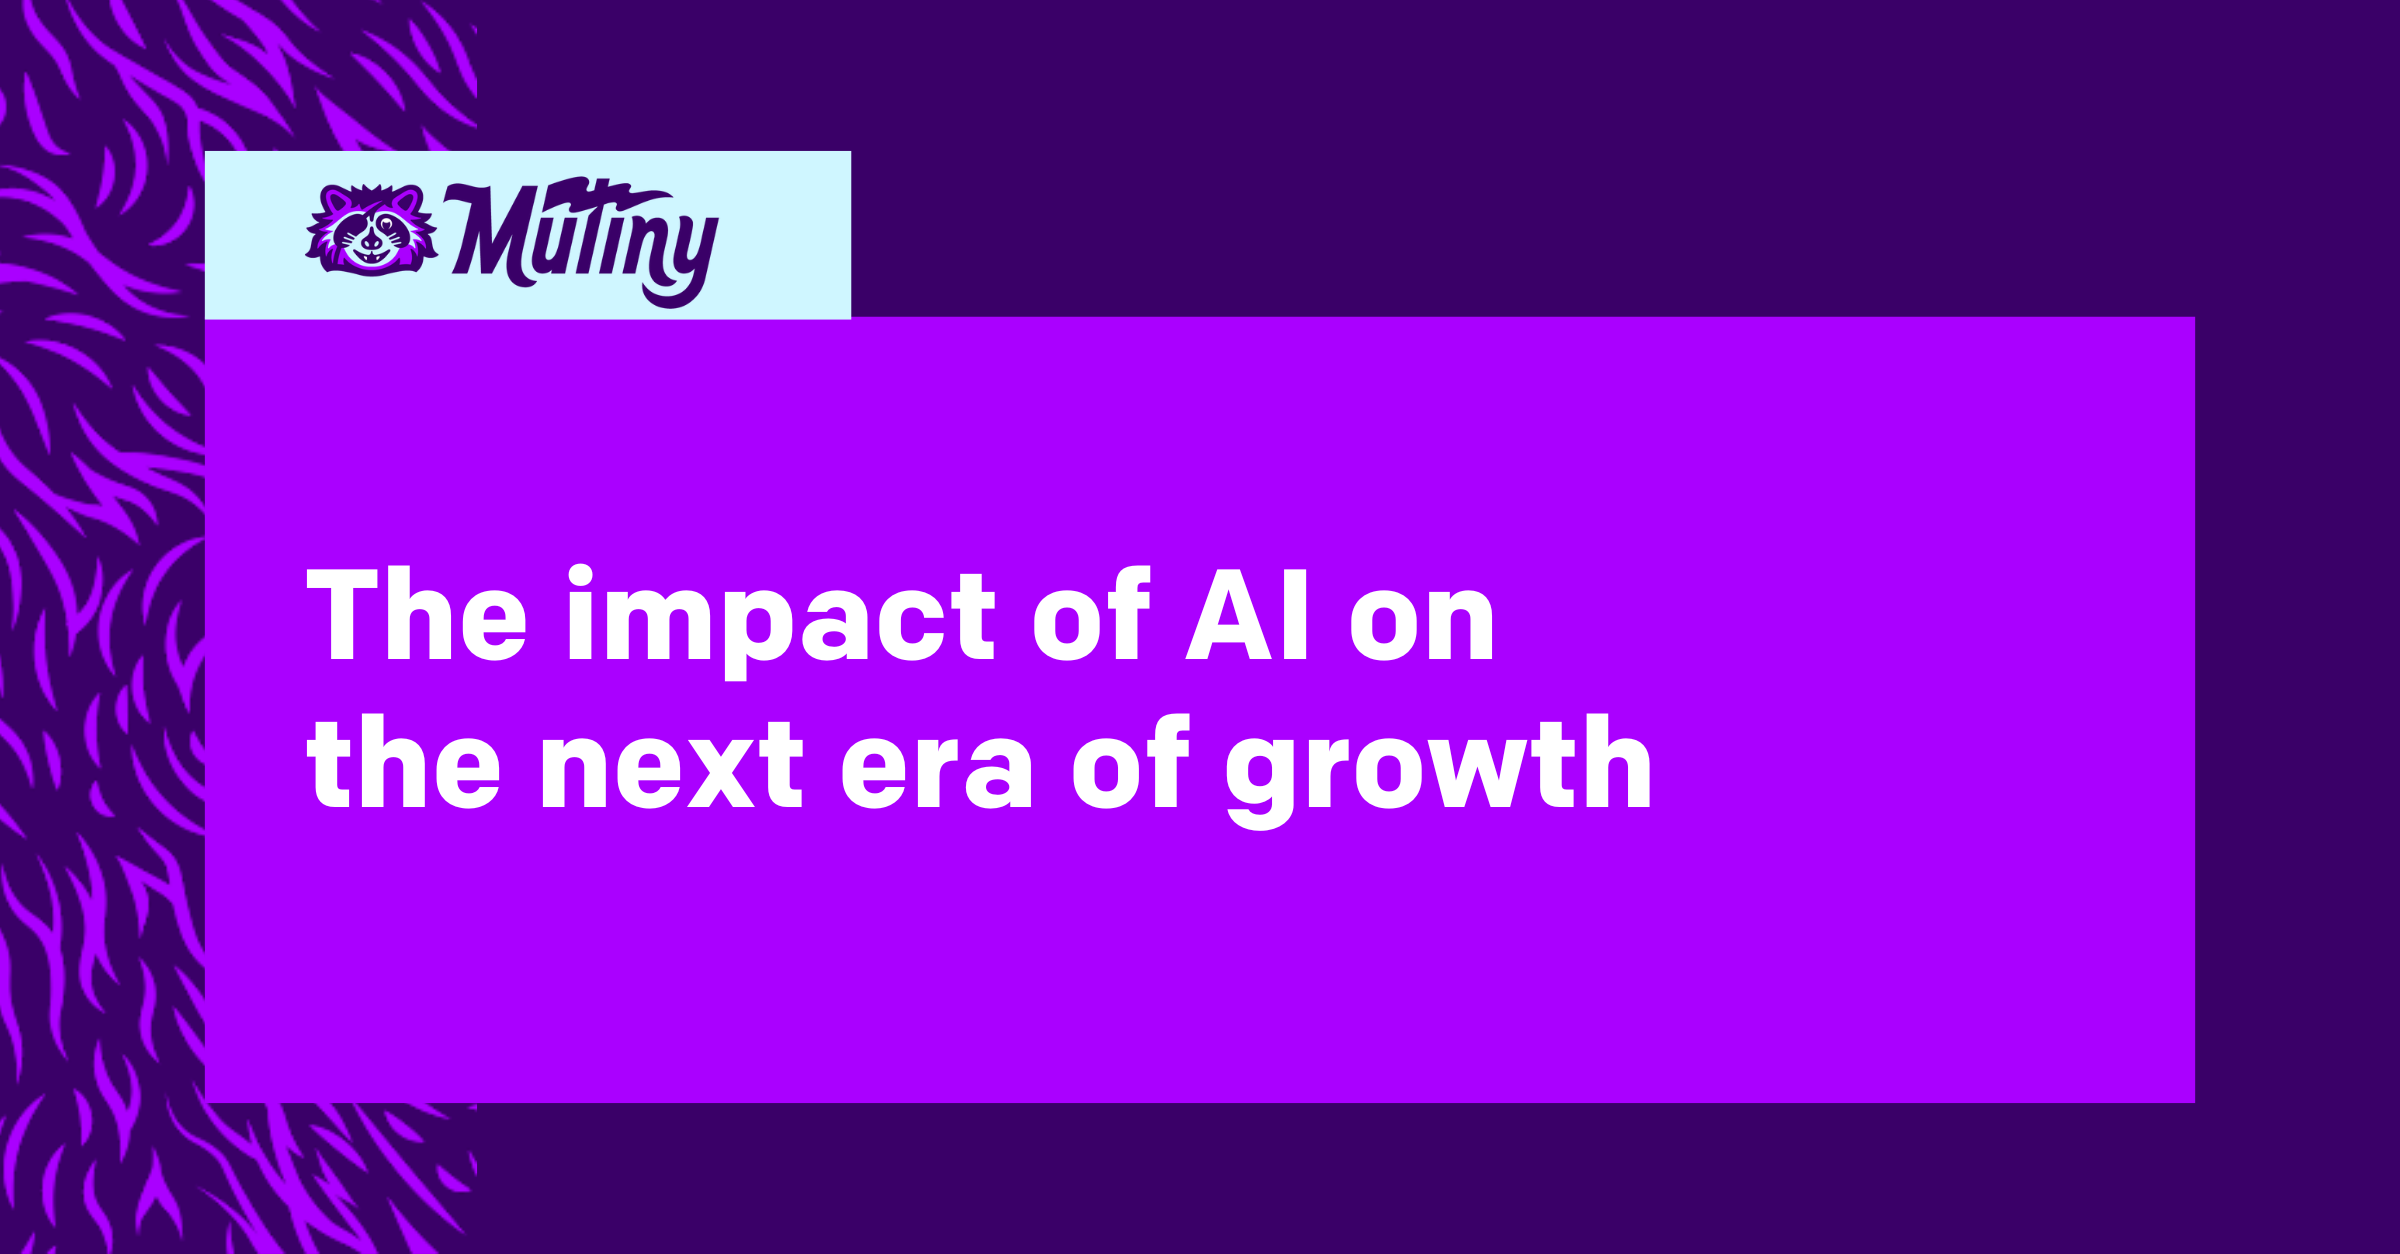 The impact of AI on the next era of growth marketing